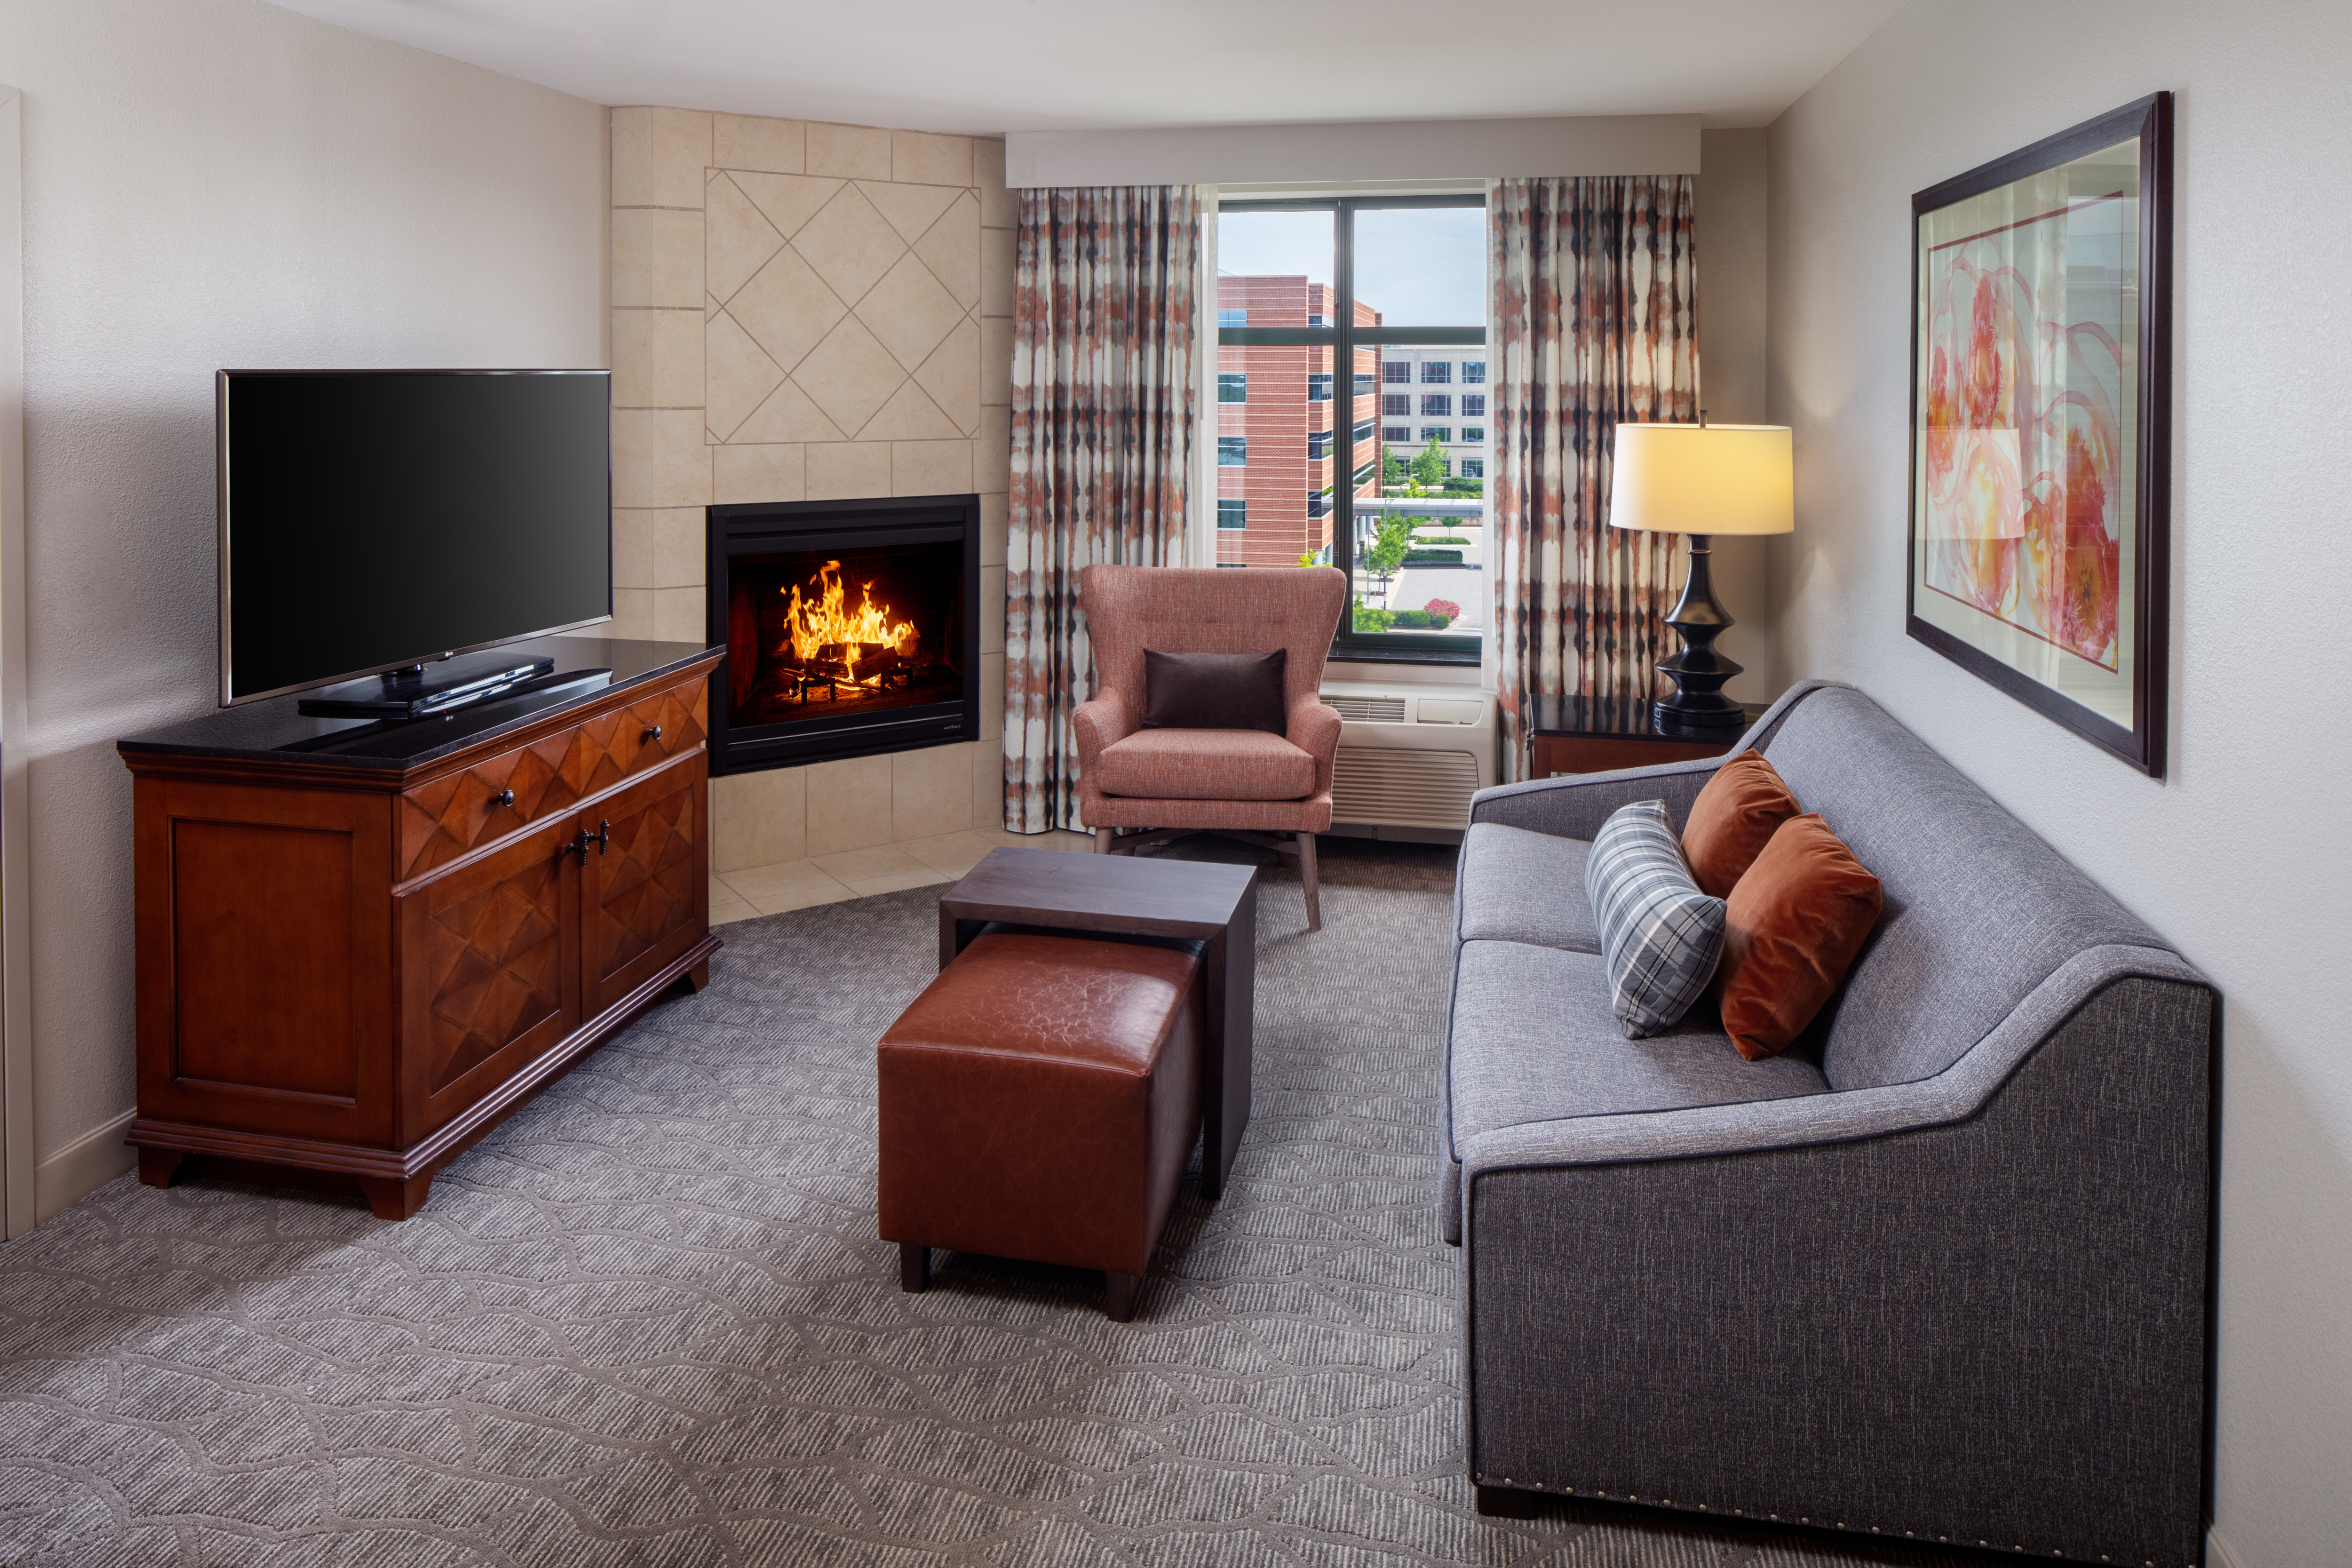 Suite Living Area with sofa, fireplace and tv